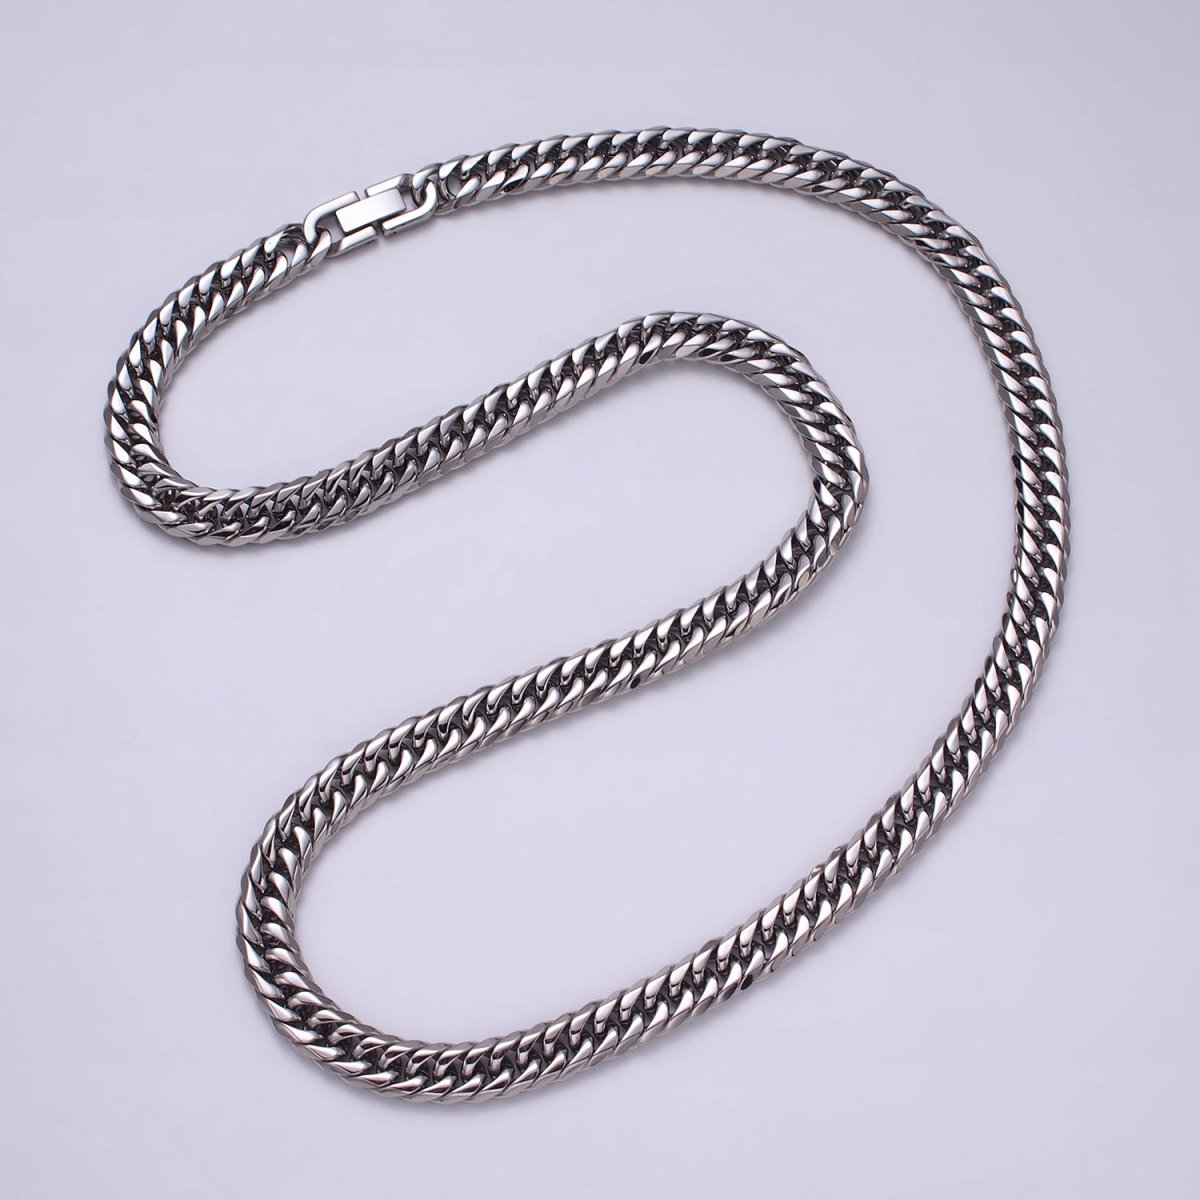 24.5 Inch Silver Cuban Curb Chain, Stainless Steel Heavy Flat Miami Cuban Curb for Men Necklace 8mm, 10mm, 12mm | WA-1723 WA-1724 WA-1725 Clearance Pricing - DLUXCA